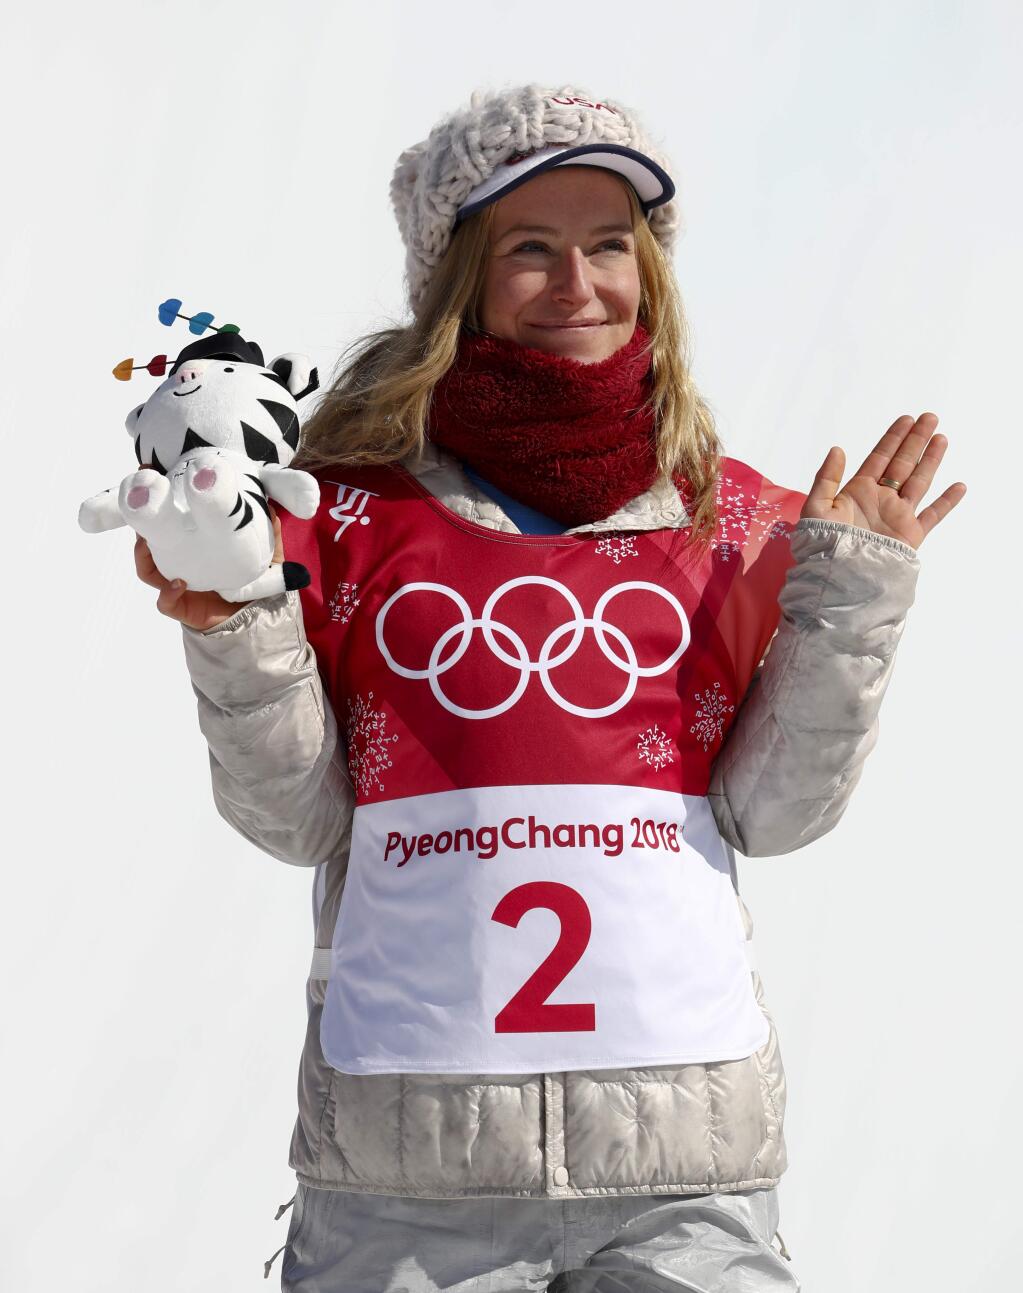 Jamie Anderson, of the United States, celebrates after winning the silver medal in the women's Big Air snowboard final at the 2018 Winter Olympics in Pyeongchang, South Korea, Thursday, Feb. 22, 2018. (AP Photo/Matthias Schrader)